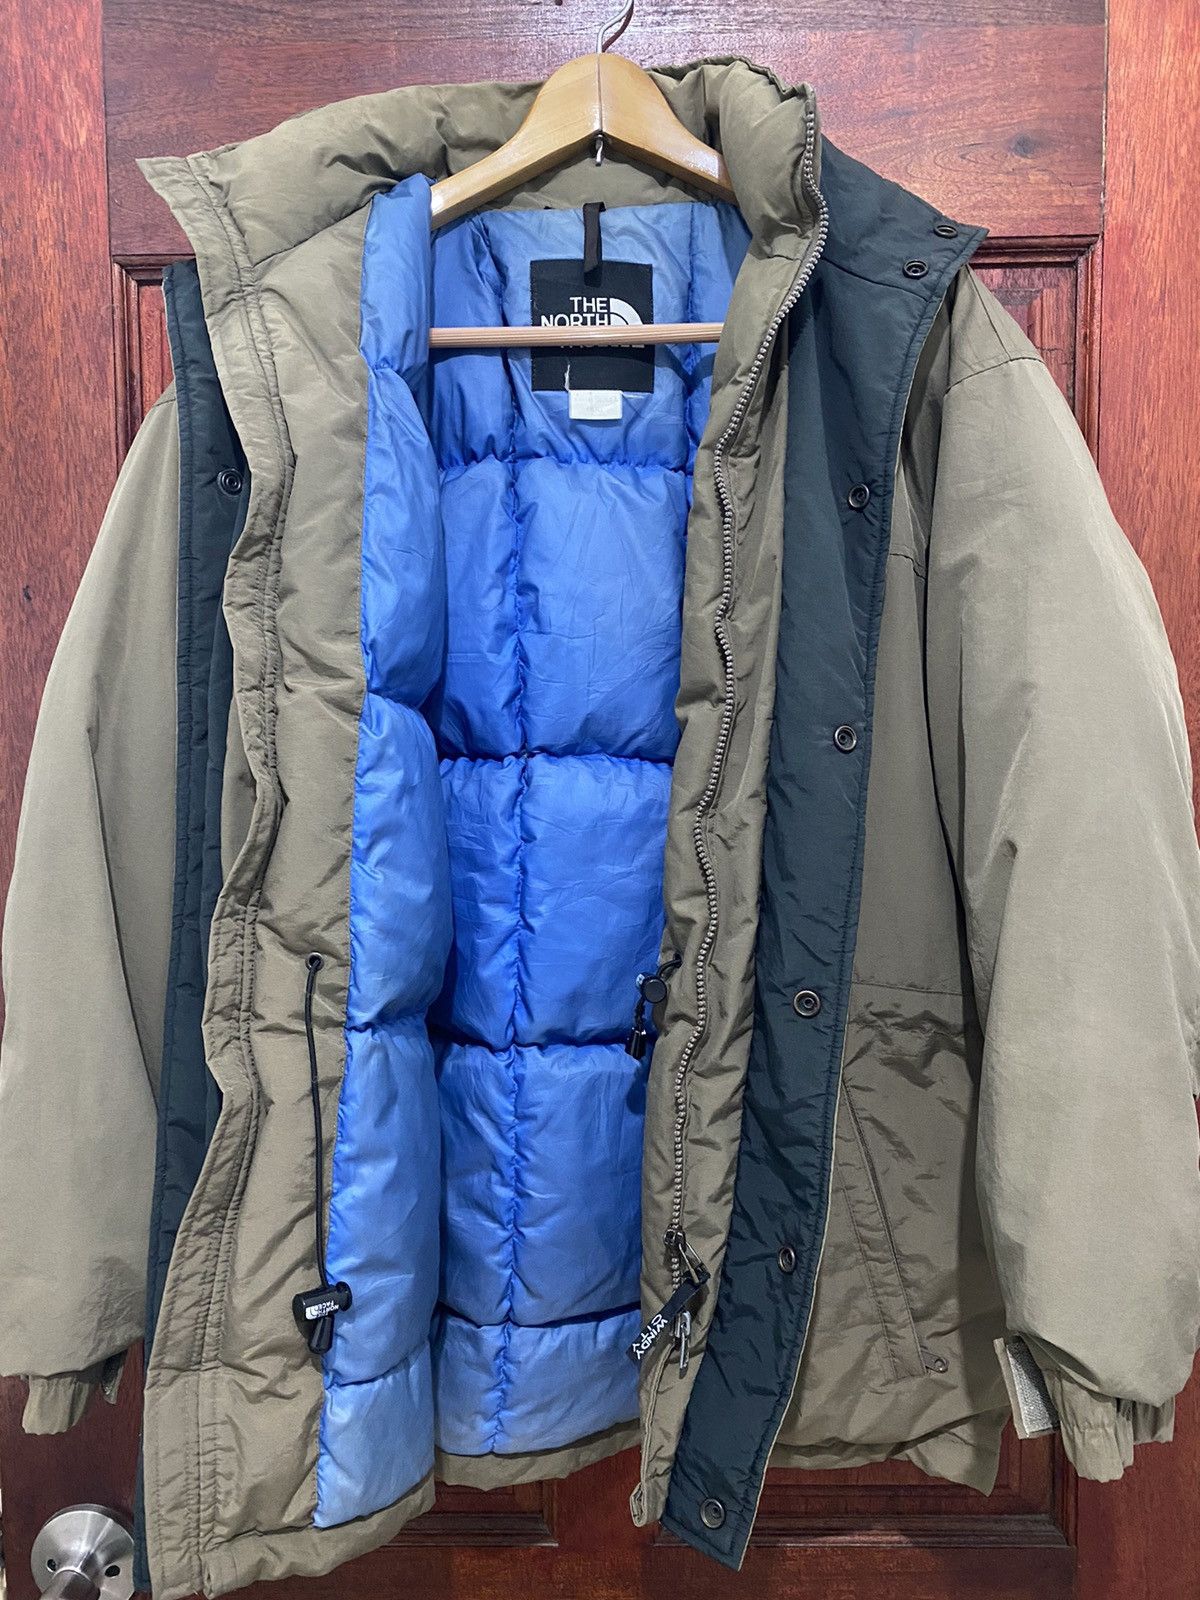 The North Face Puffer Jacket - 7